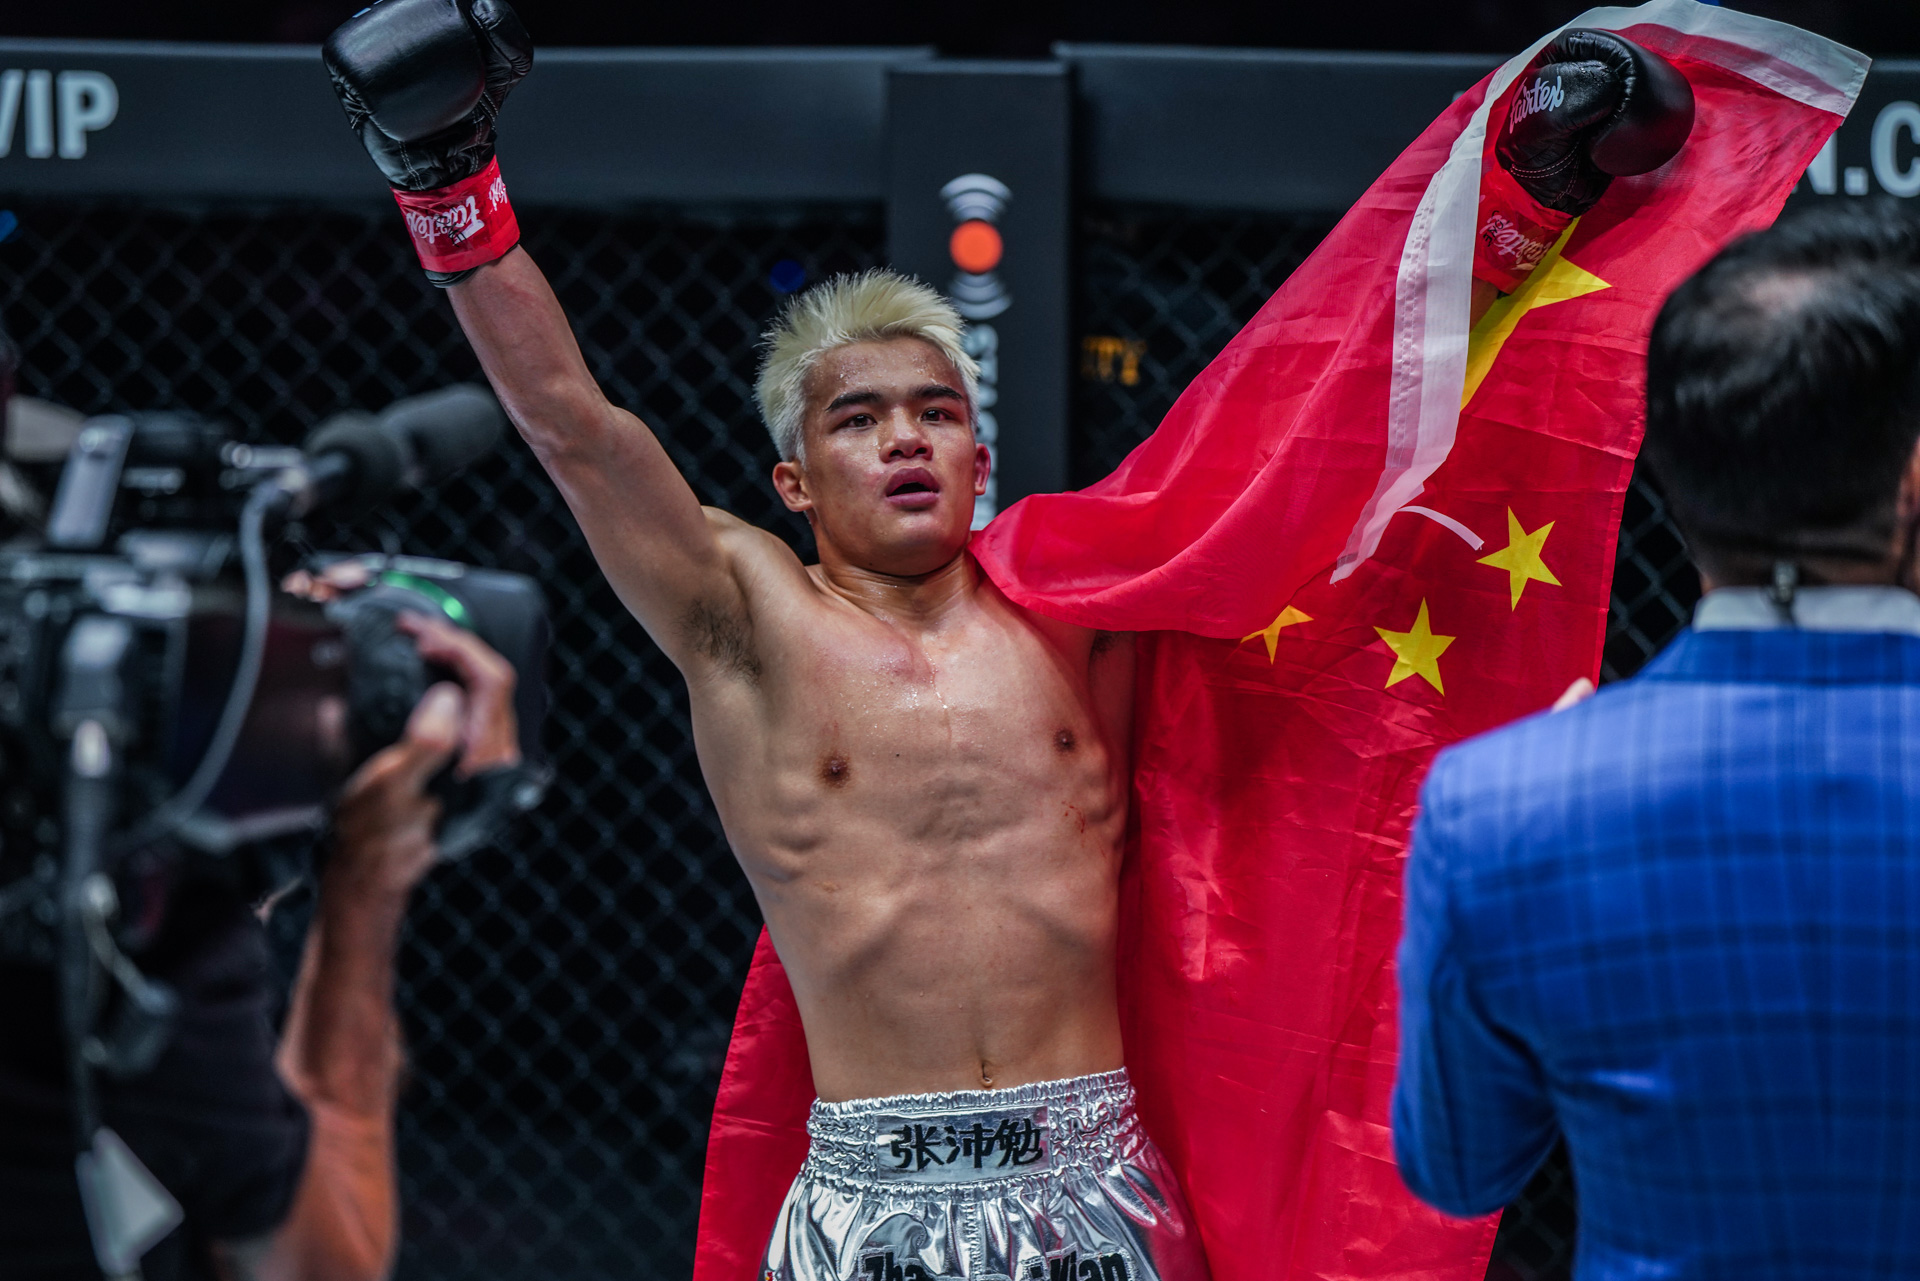 Zhang Peimian in the ONE Championship cage